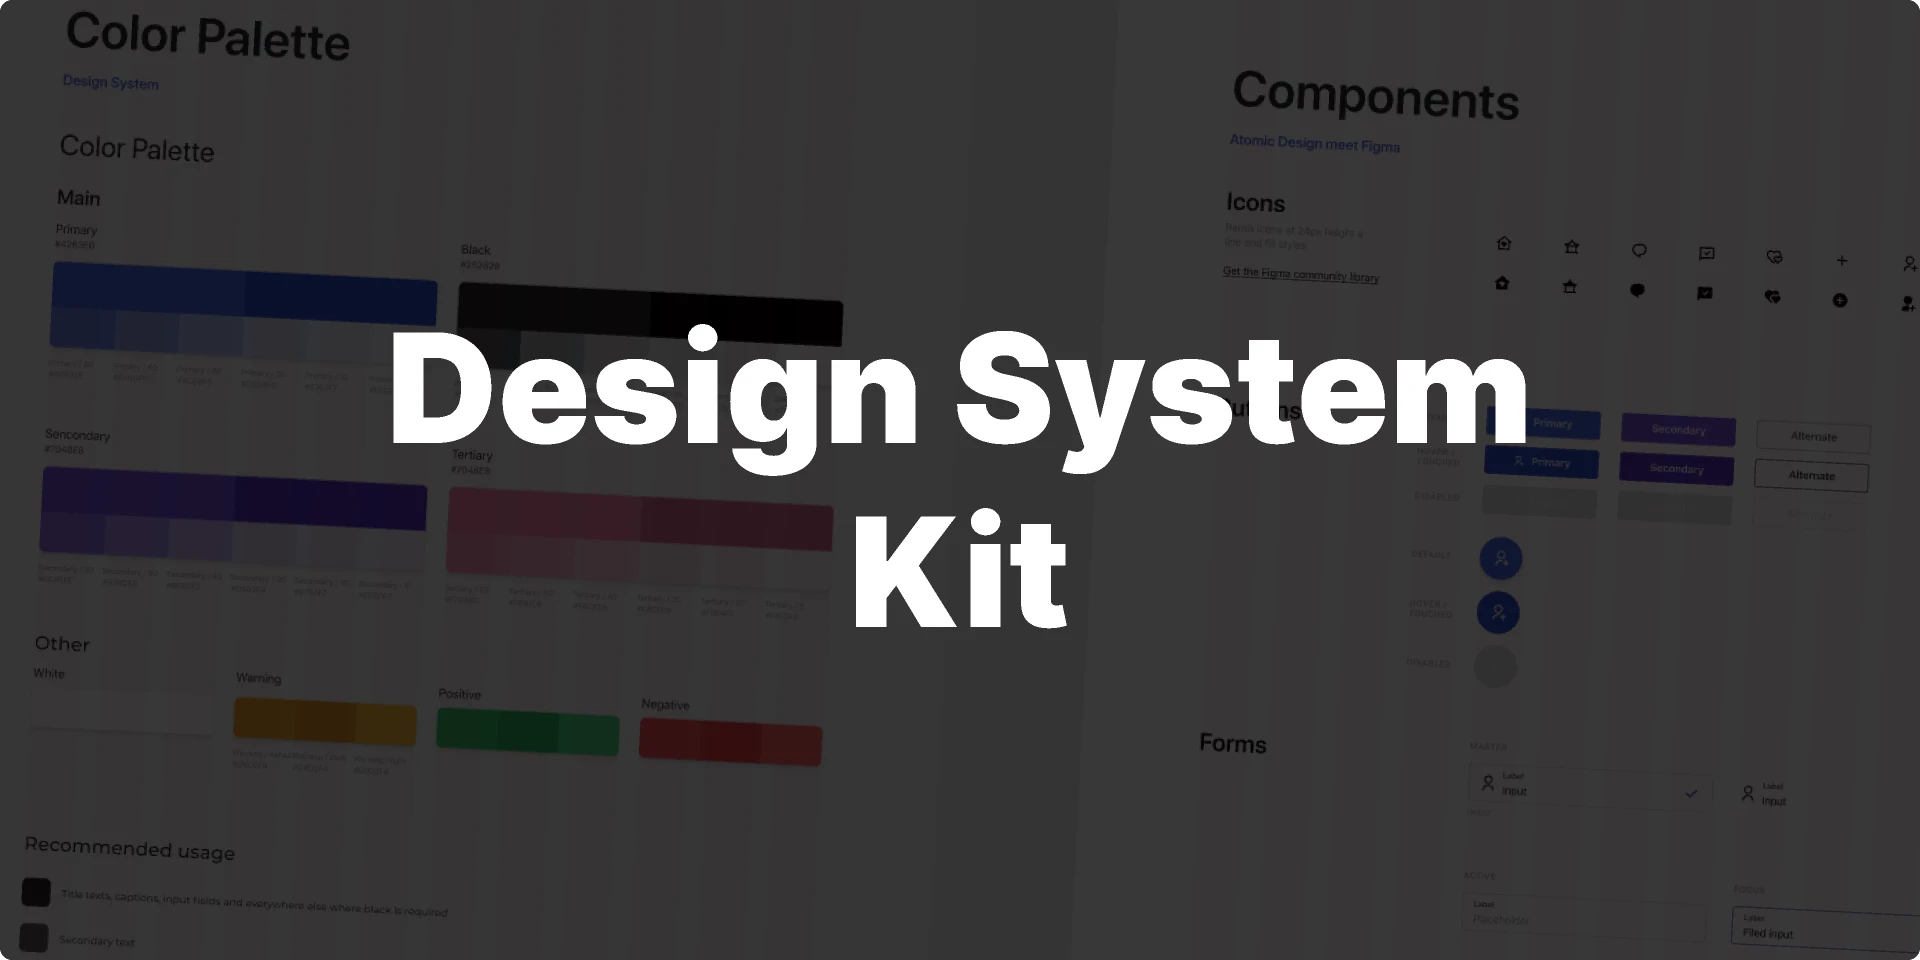 Design system kit for Figma and Adobe XD